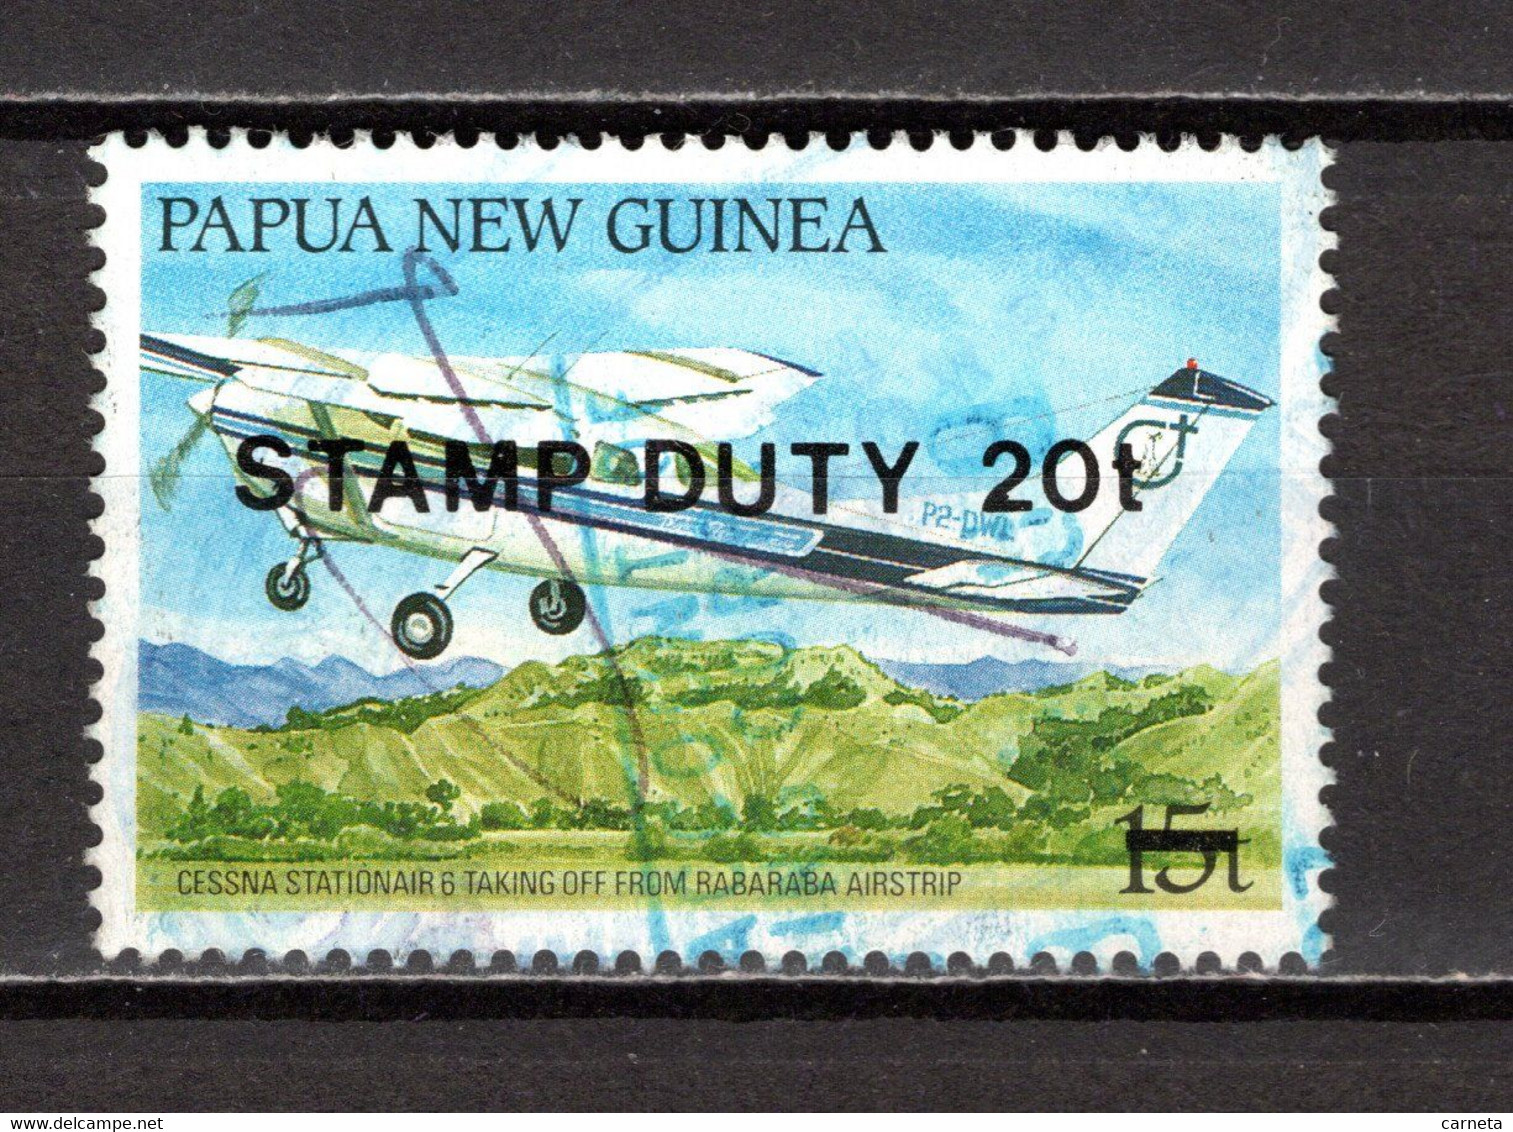 PAPOUASIE ET Nlle GUINEE    N° ? SURCHARGE STAMP DUTY 20t/15t      OBLITERE    COTE ? €    AVION - Papua New Guinea